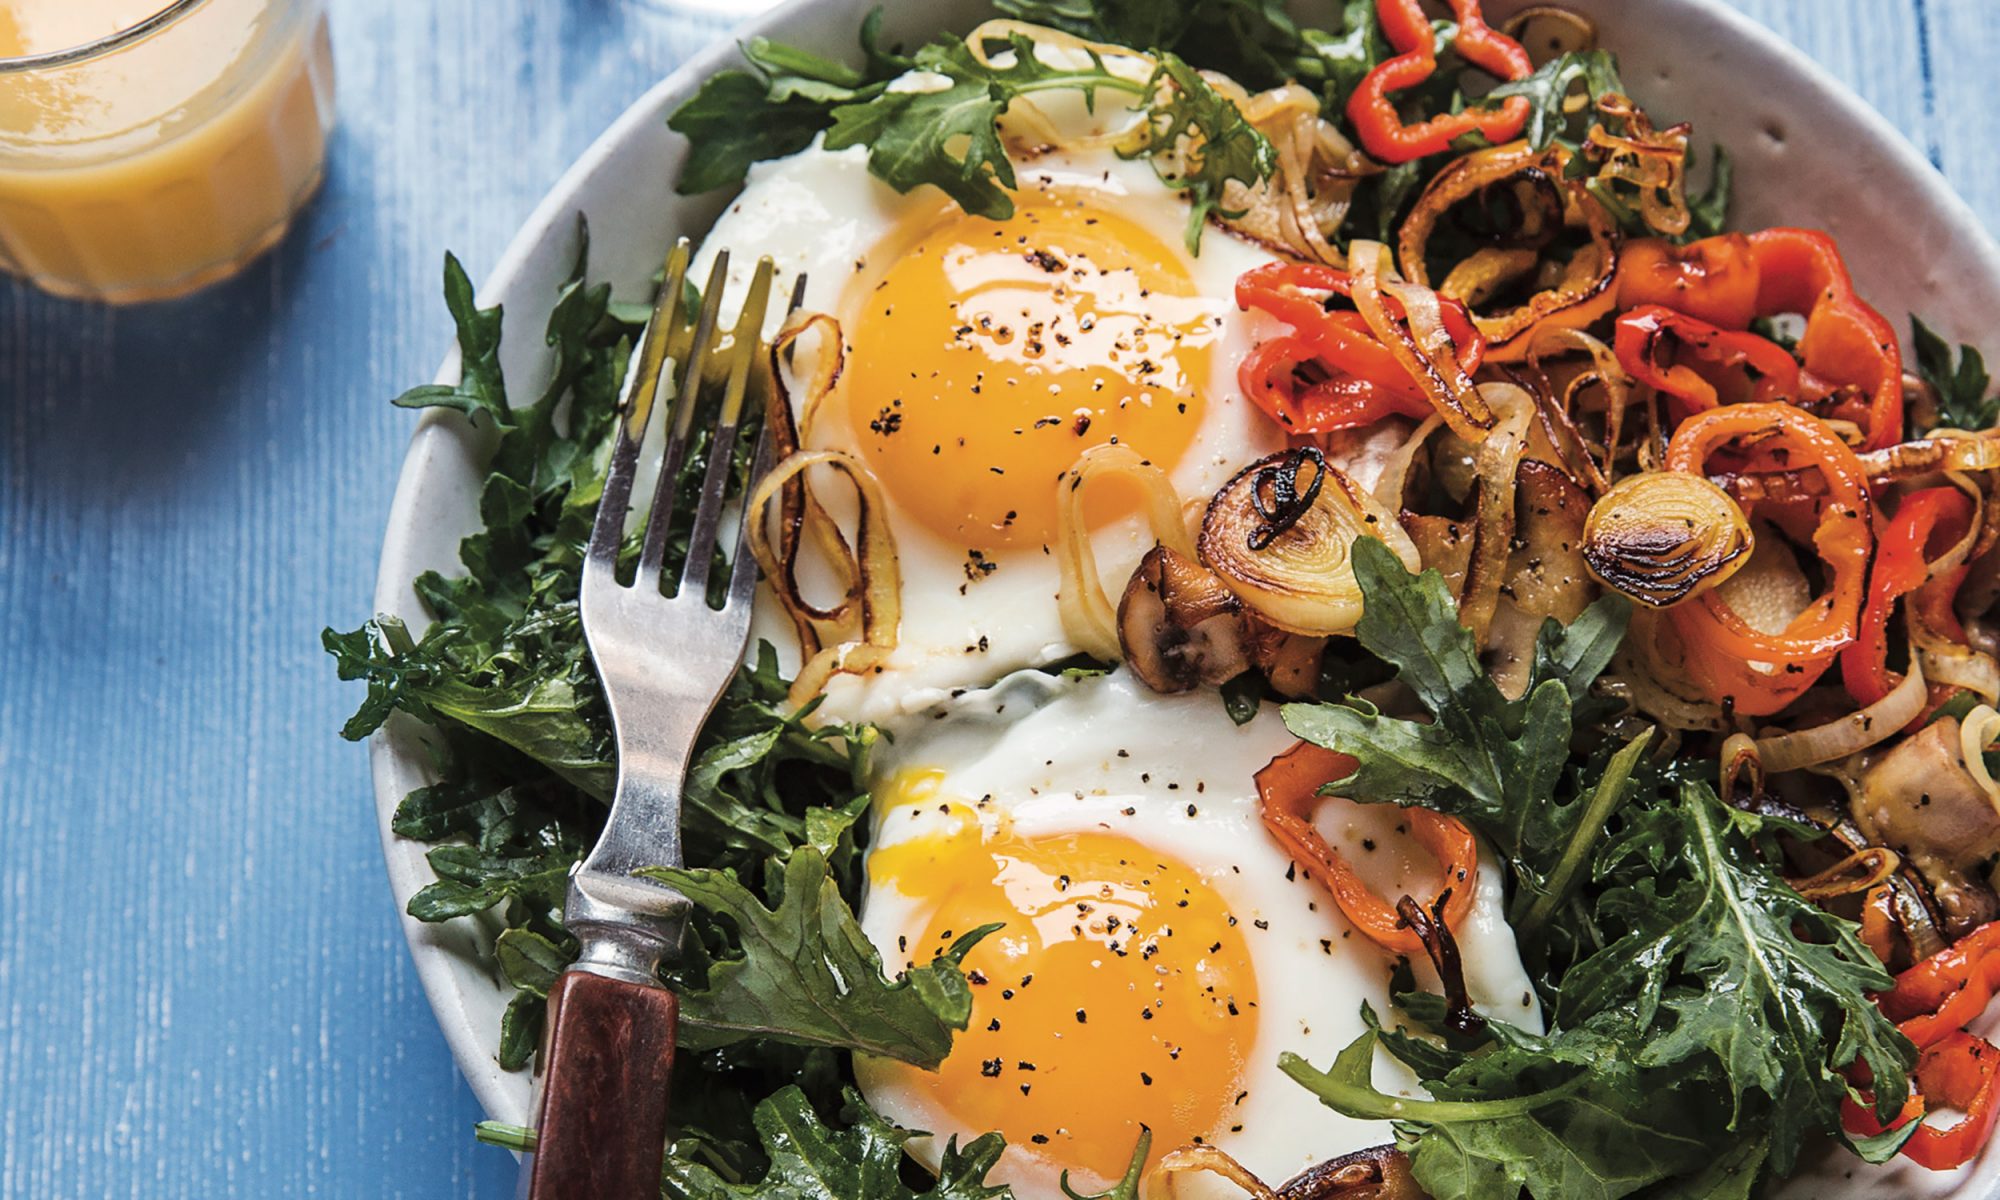 https://static.onecms.io/wp-content/uploads/sites/19/2018/02/13/field-image-sunny-side-breakfast-salad-2000.jpg